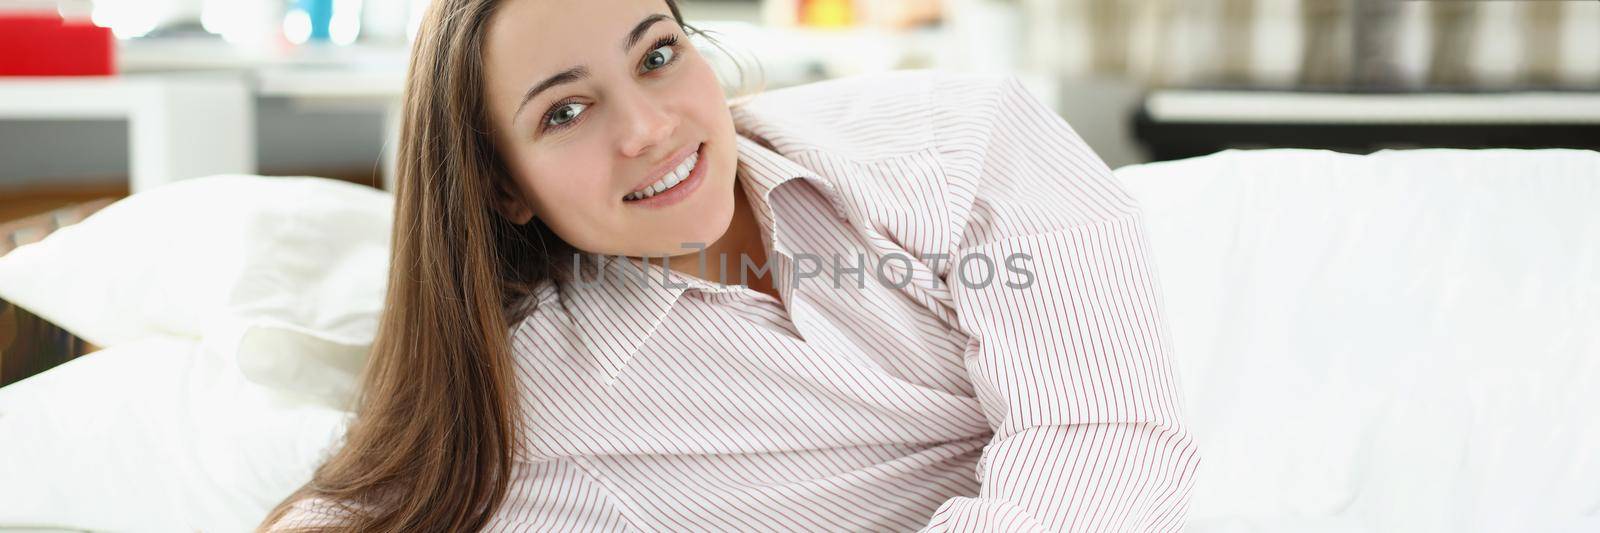 Portrait of happy well rested woman in pyjamas, wake up after peaceful night sleep, energized and cheerful. Good morning, start new day, wakeup, have good day concept